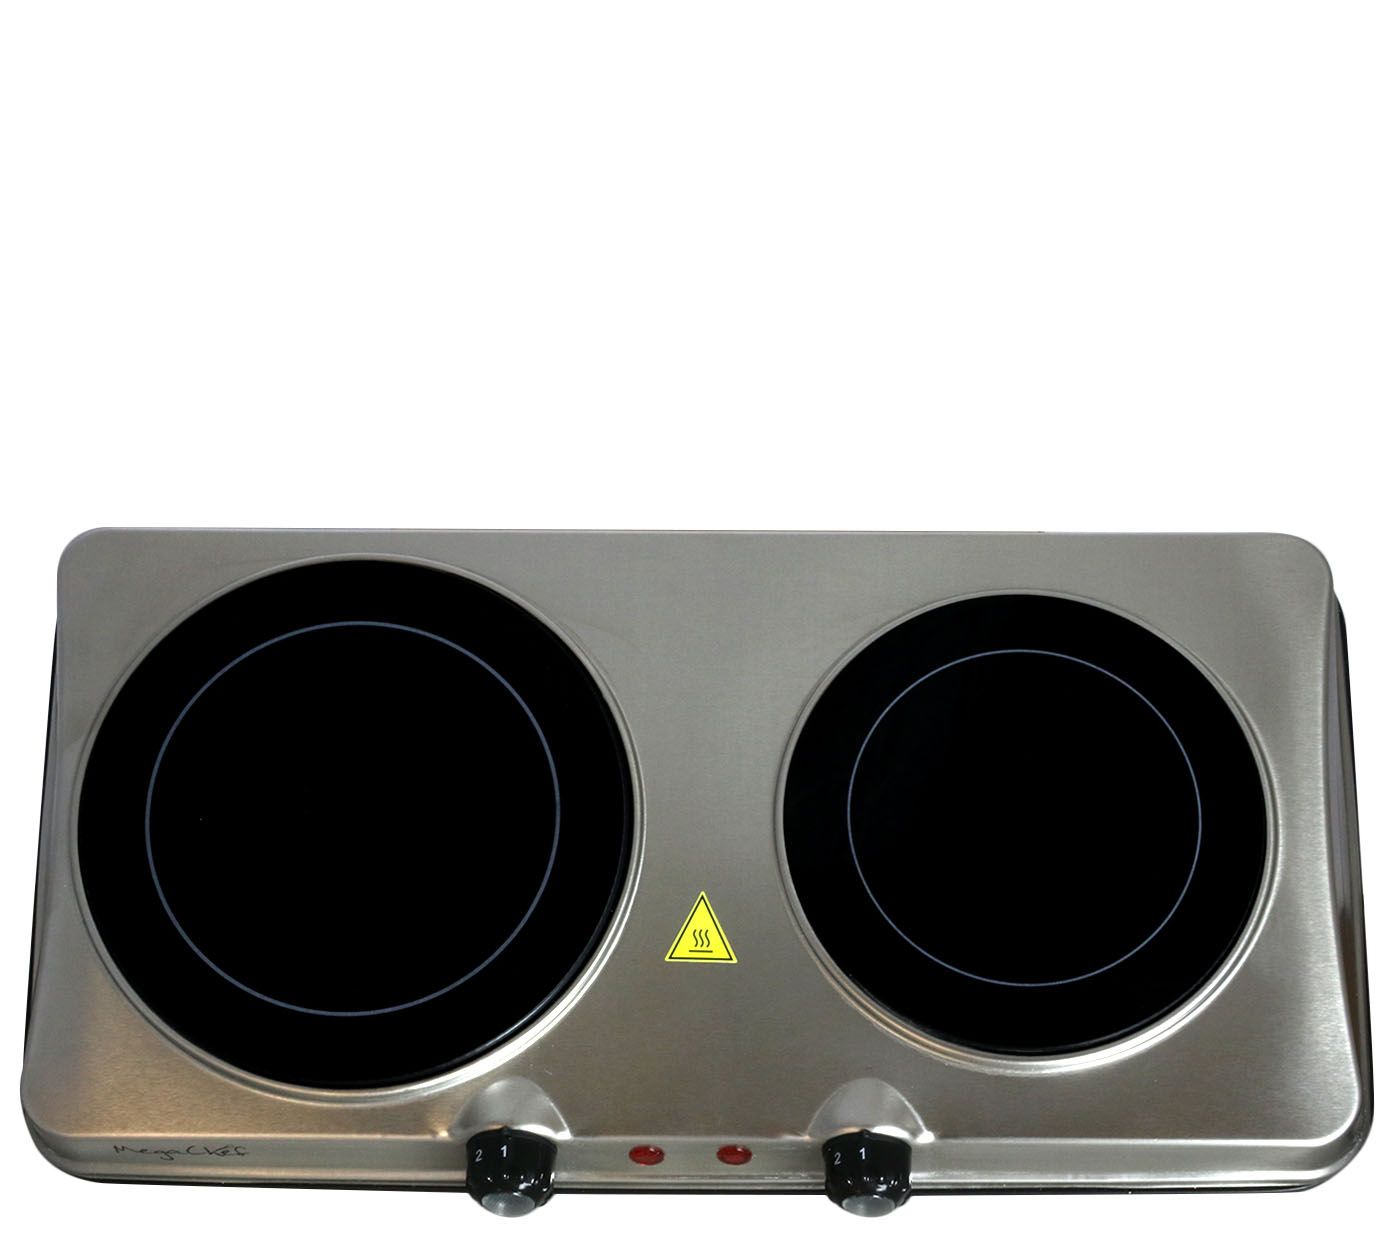 MegaChef Ceramic Infrared Double Cooktop